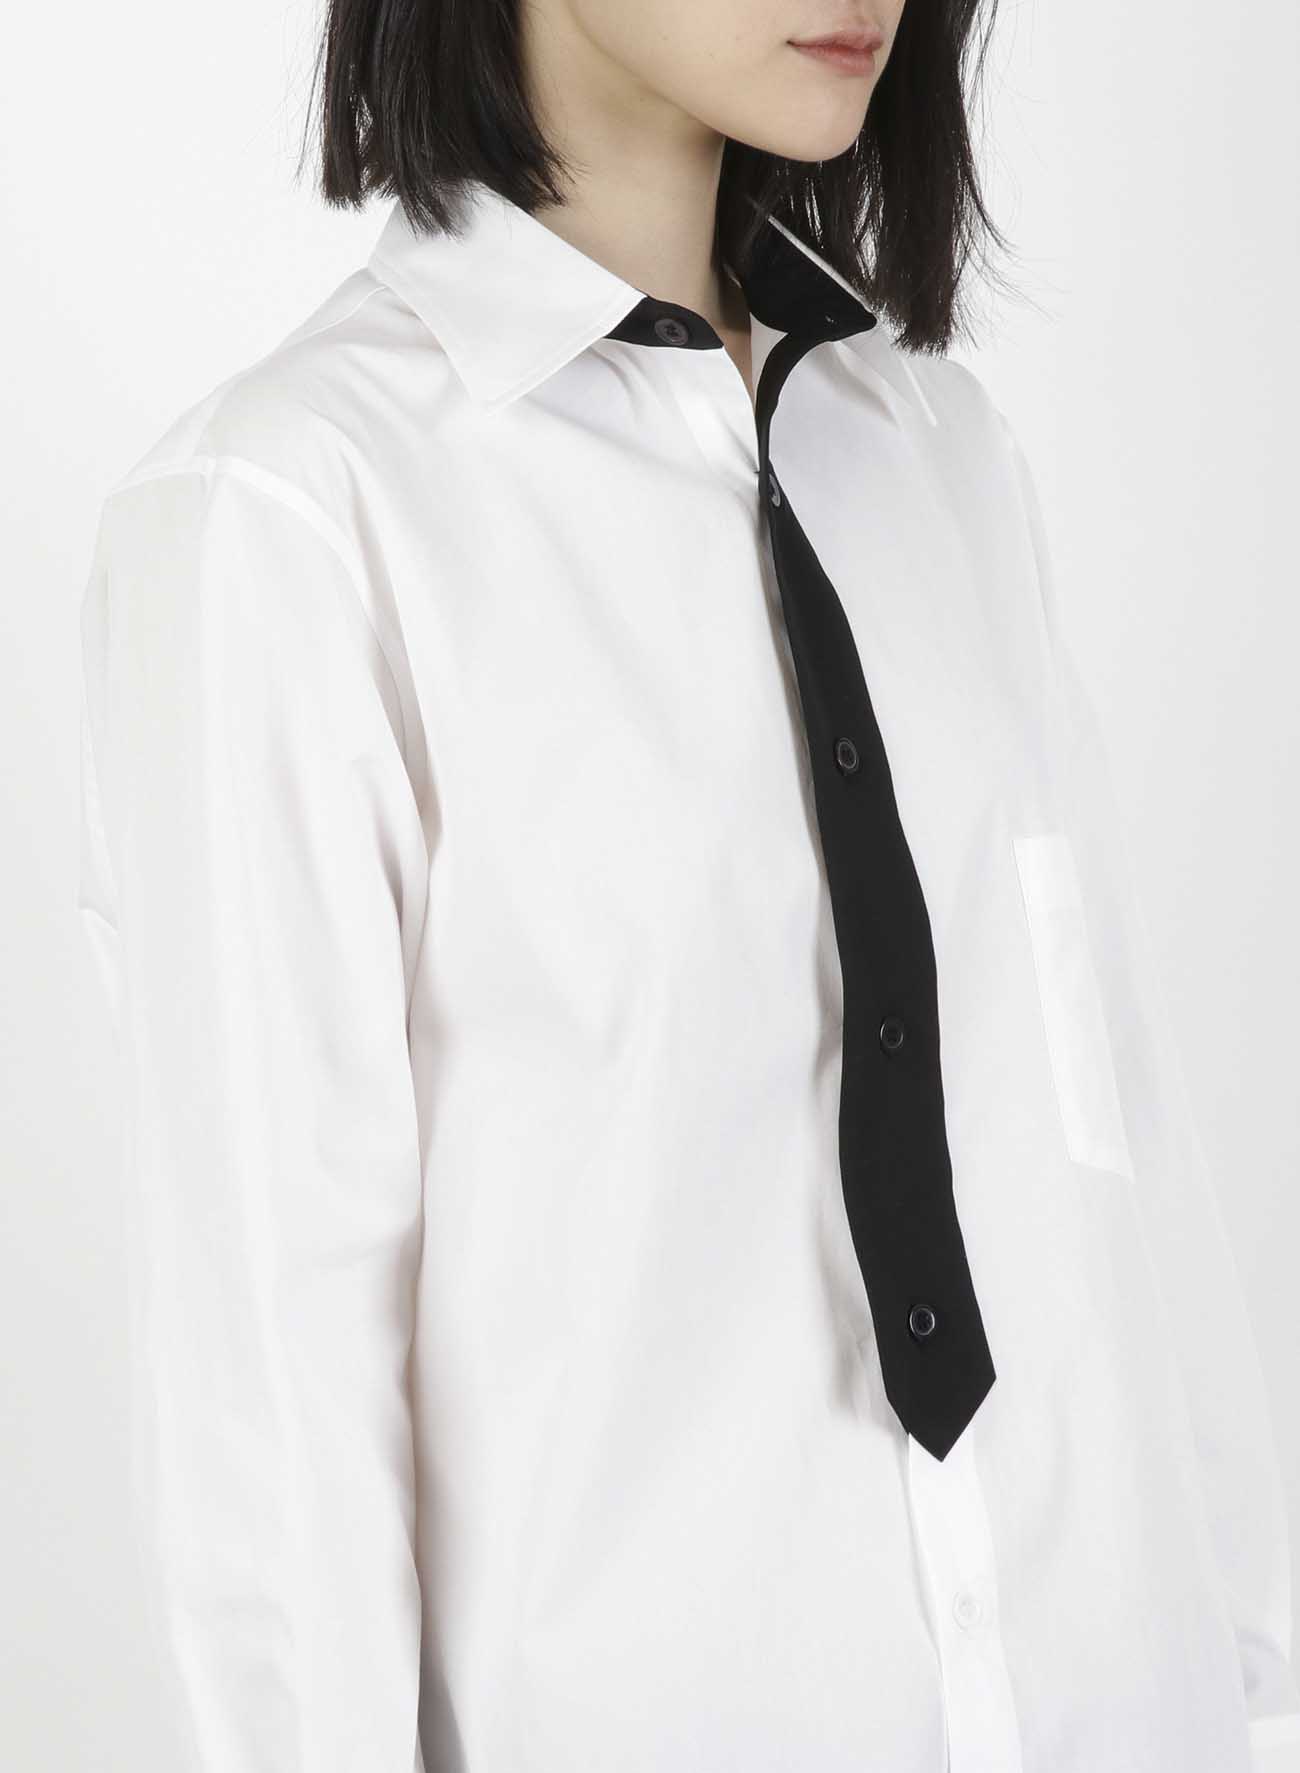 100/2 BROAD TIE FRONT FLY SHIRT